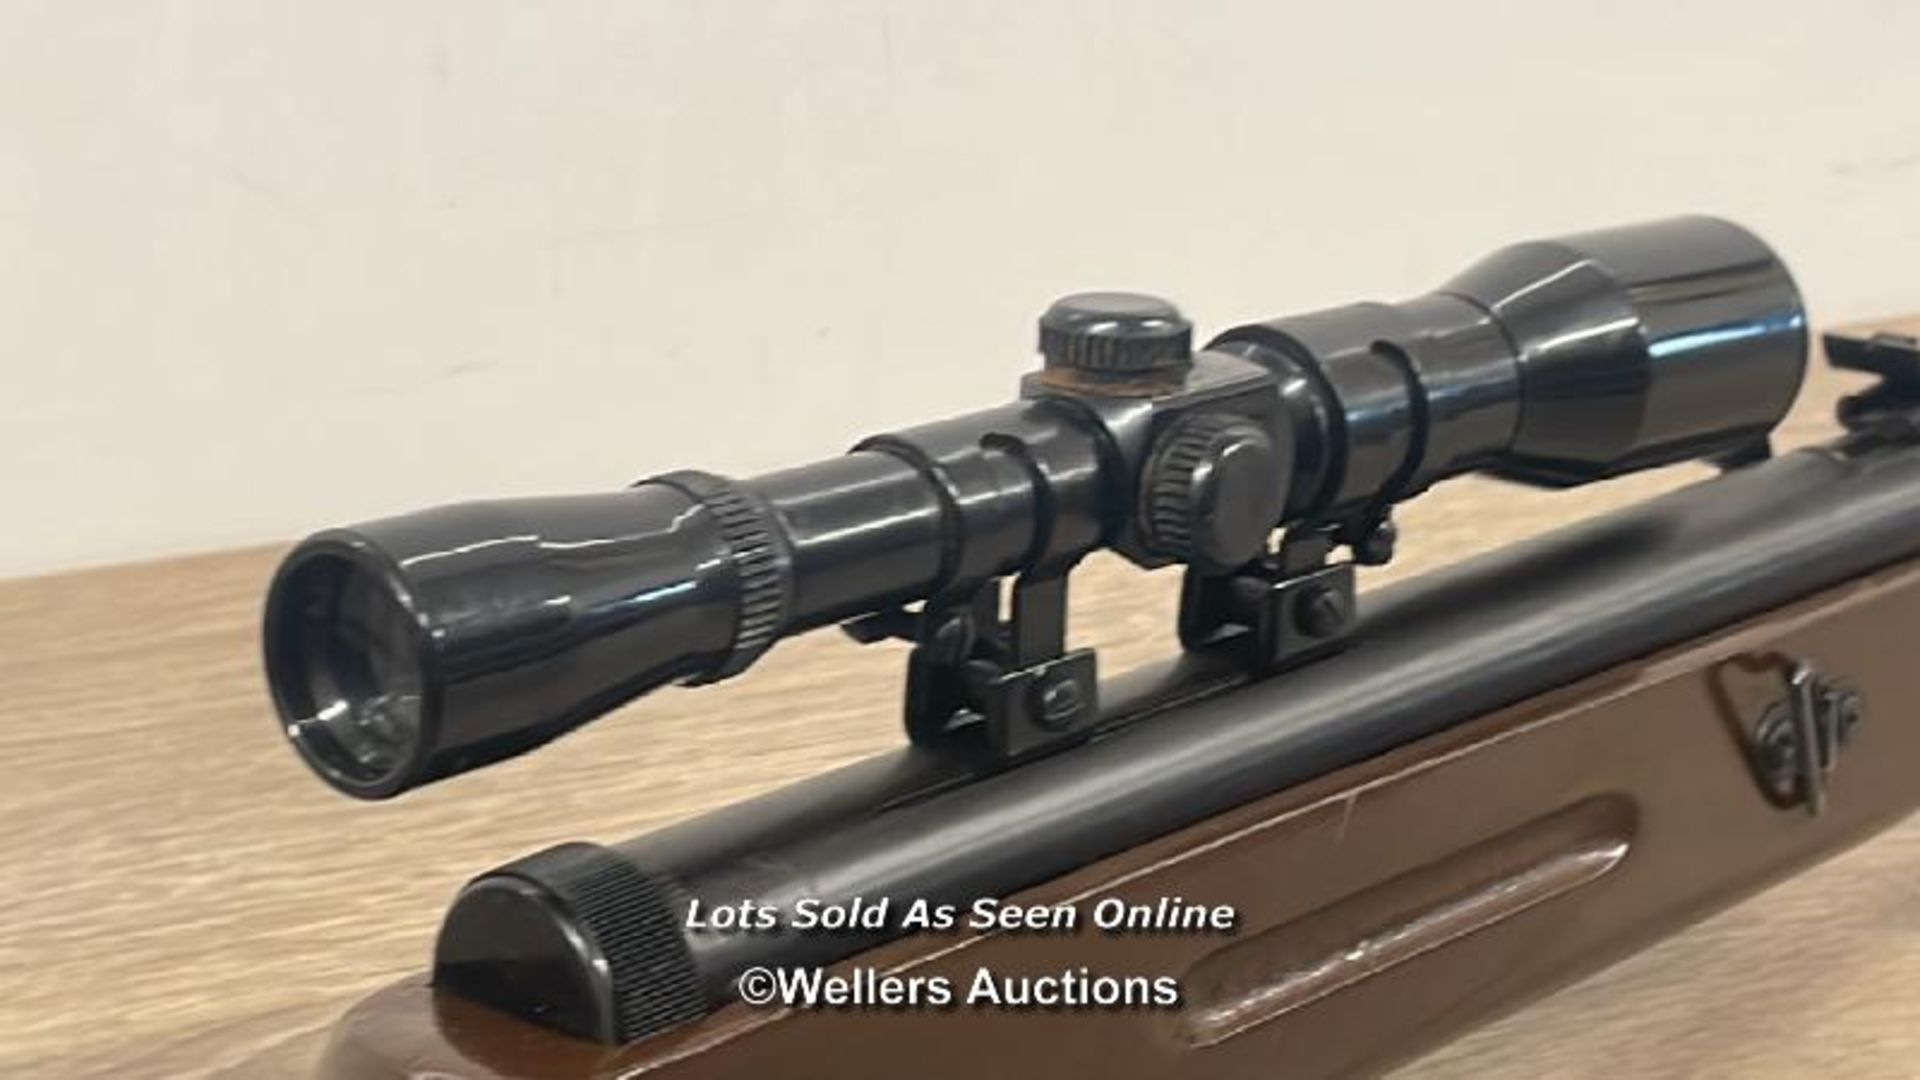 WESLAKE .177 CALIBRE AIR RIFLE WITH SCOPE. 108CM LONG - Image 8 of 8